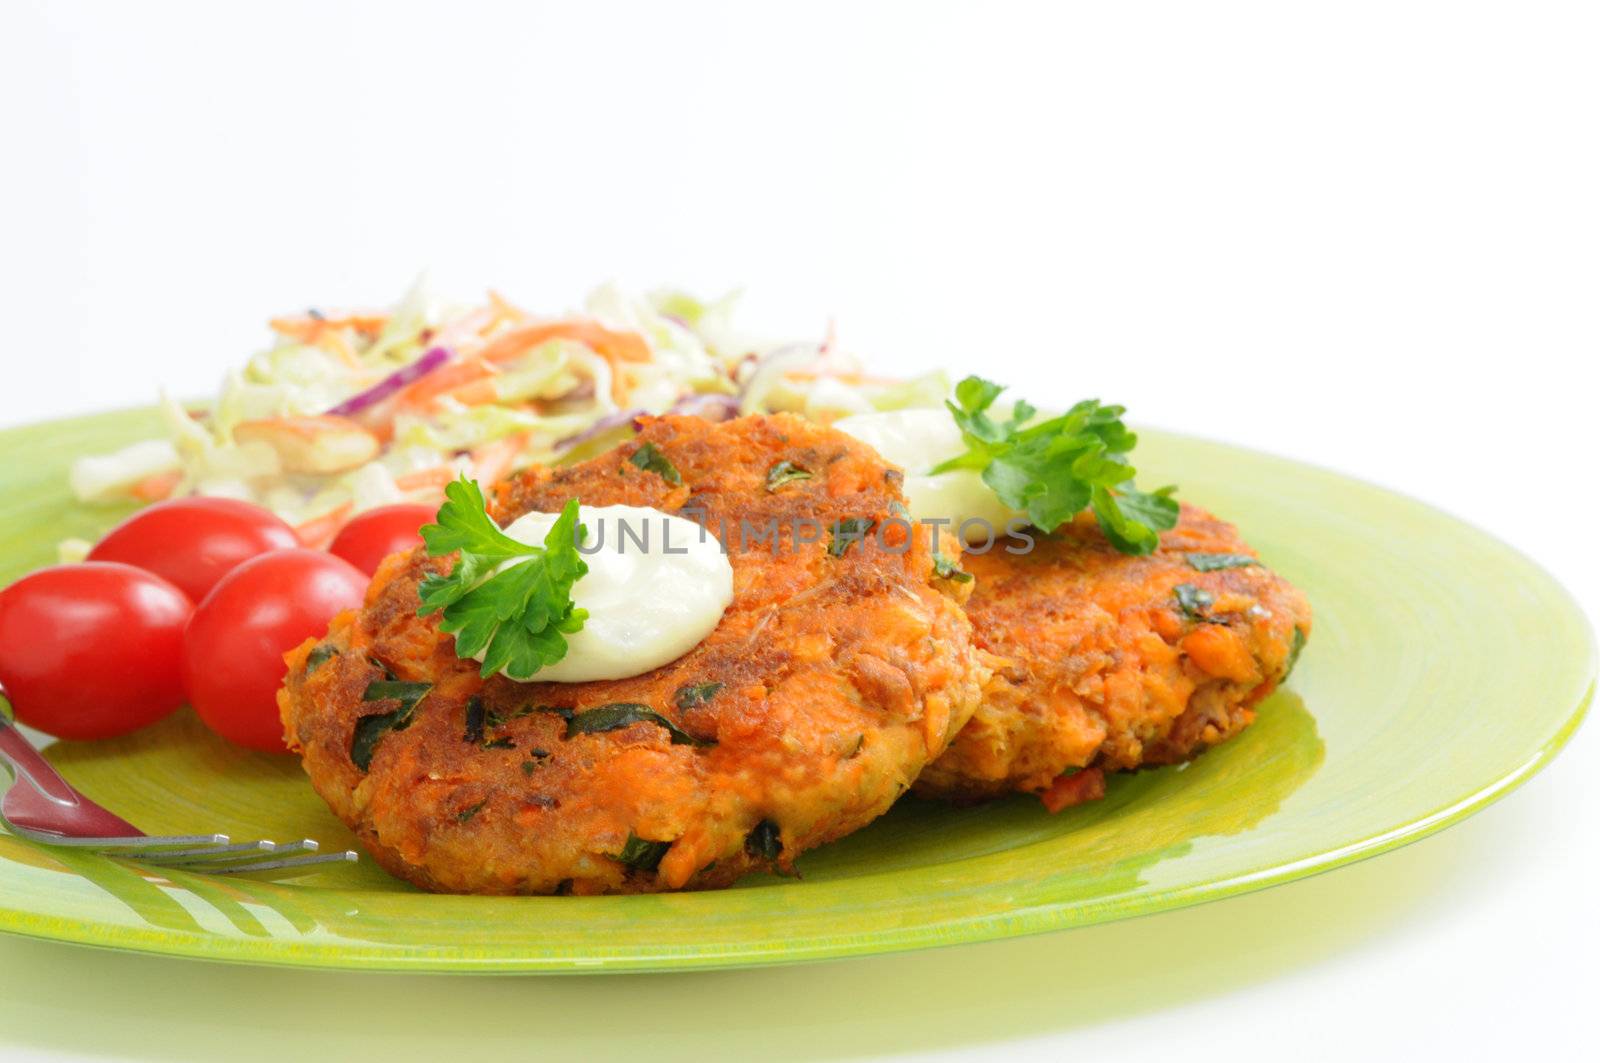 Fresh homemade salmon cakes served with vegetables.